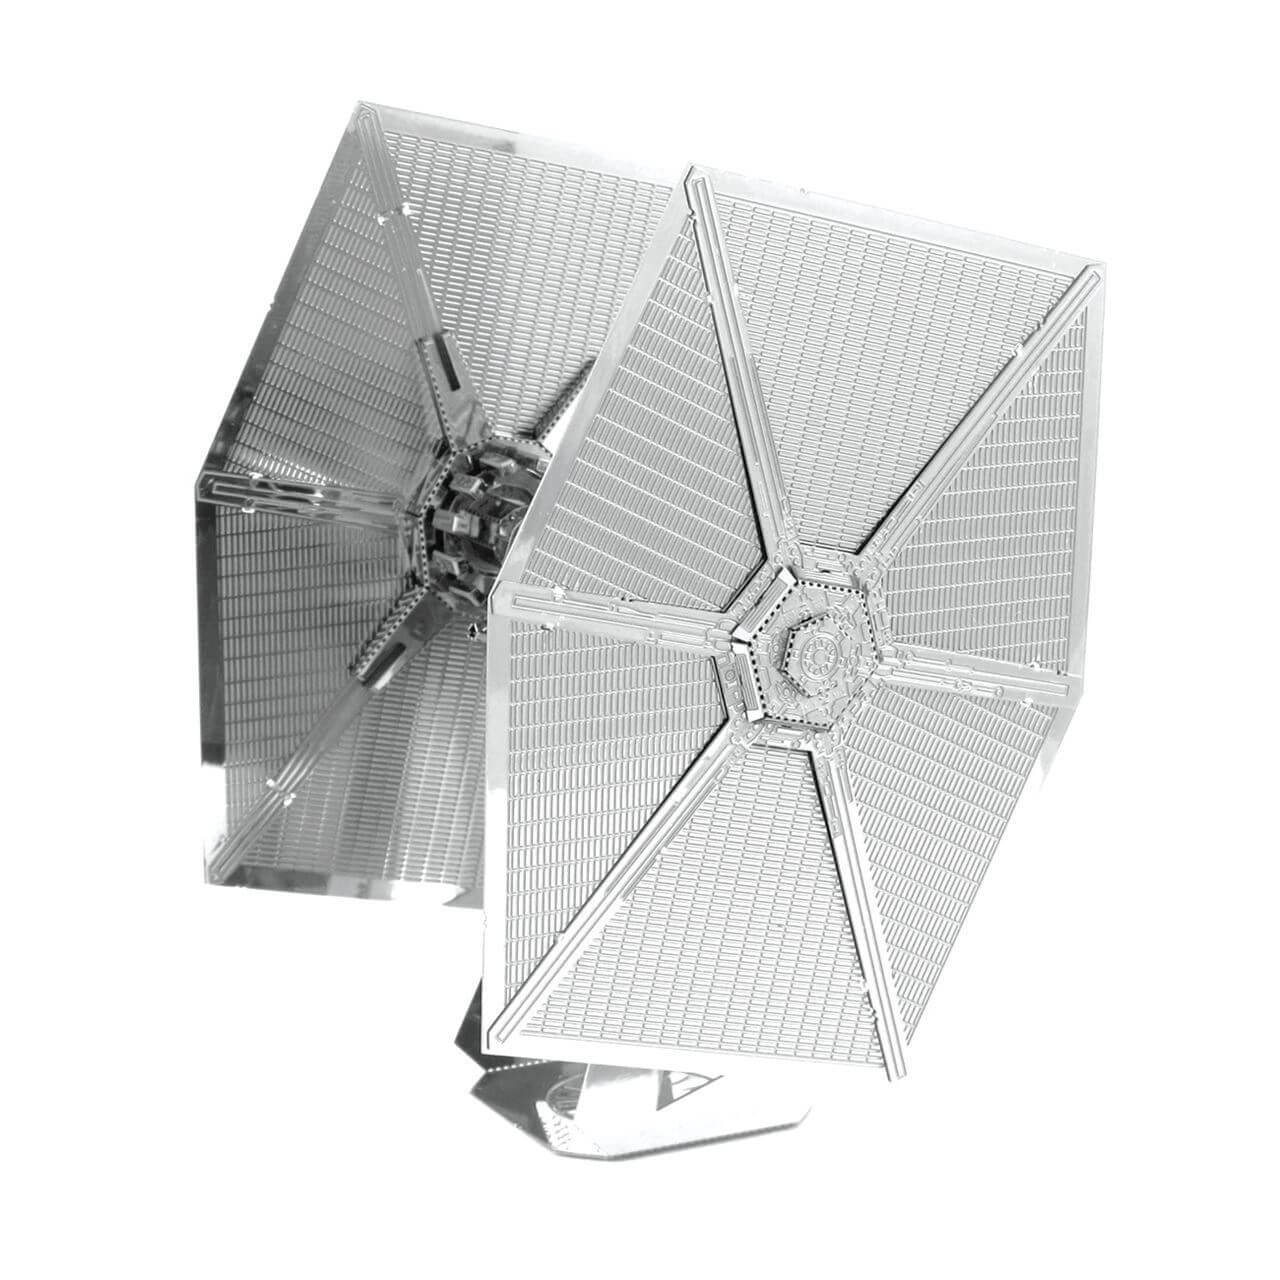 Side view of the Metal Earth Star Wars Special Forces TIE Fighter Metal Kit - 2 Sheets.